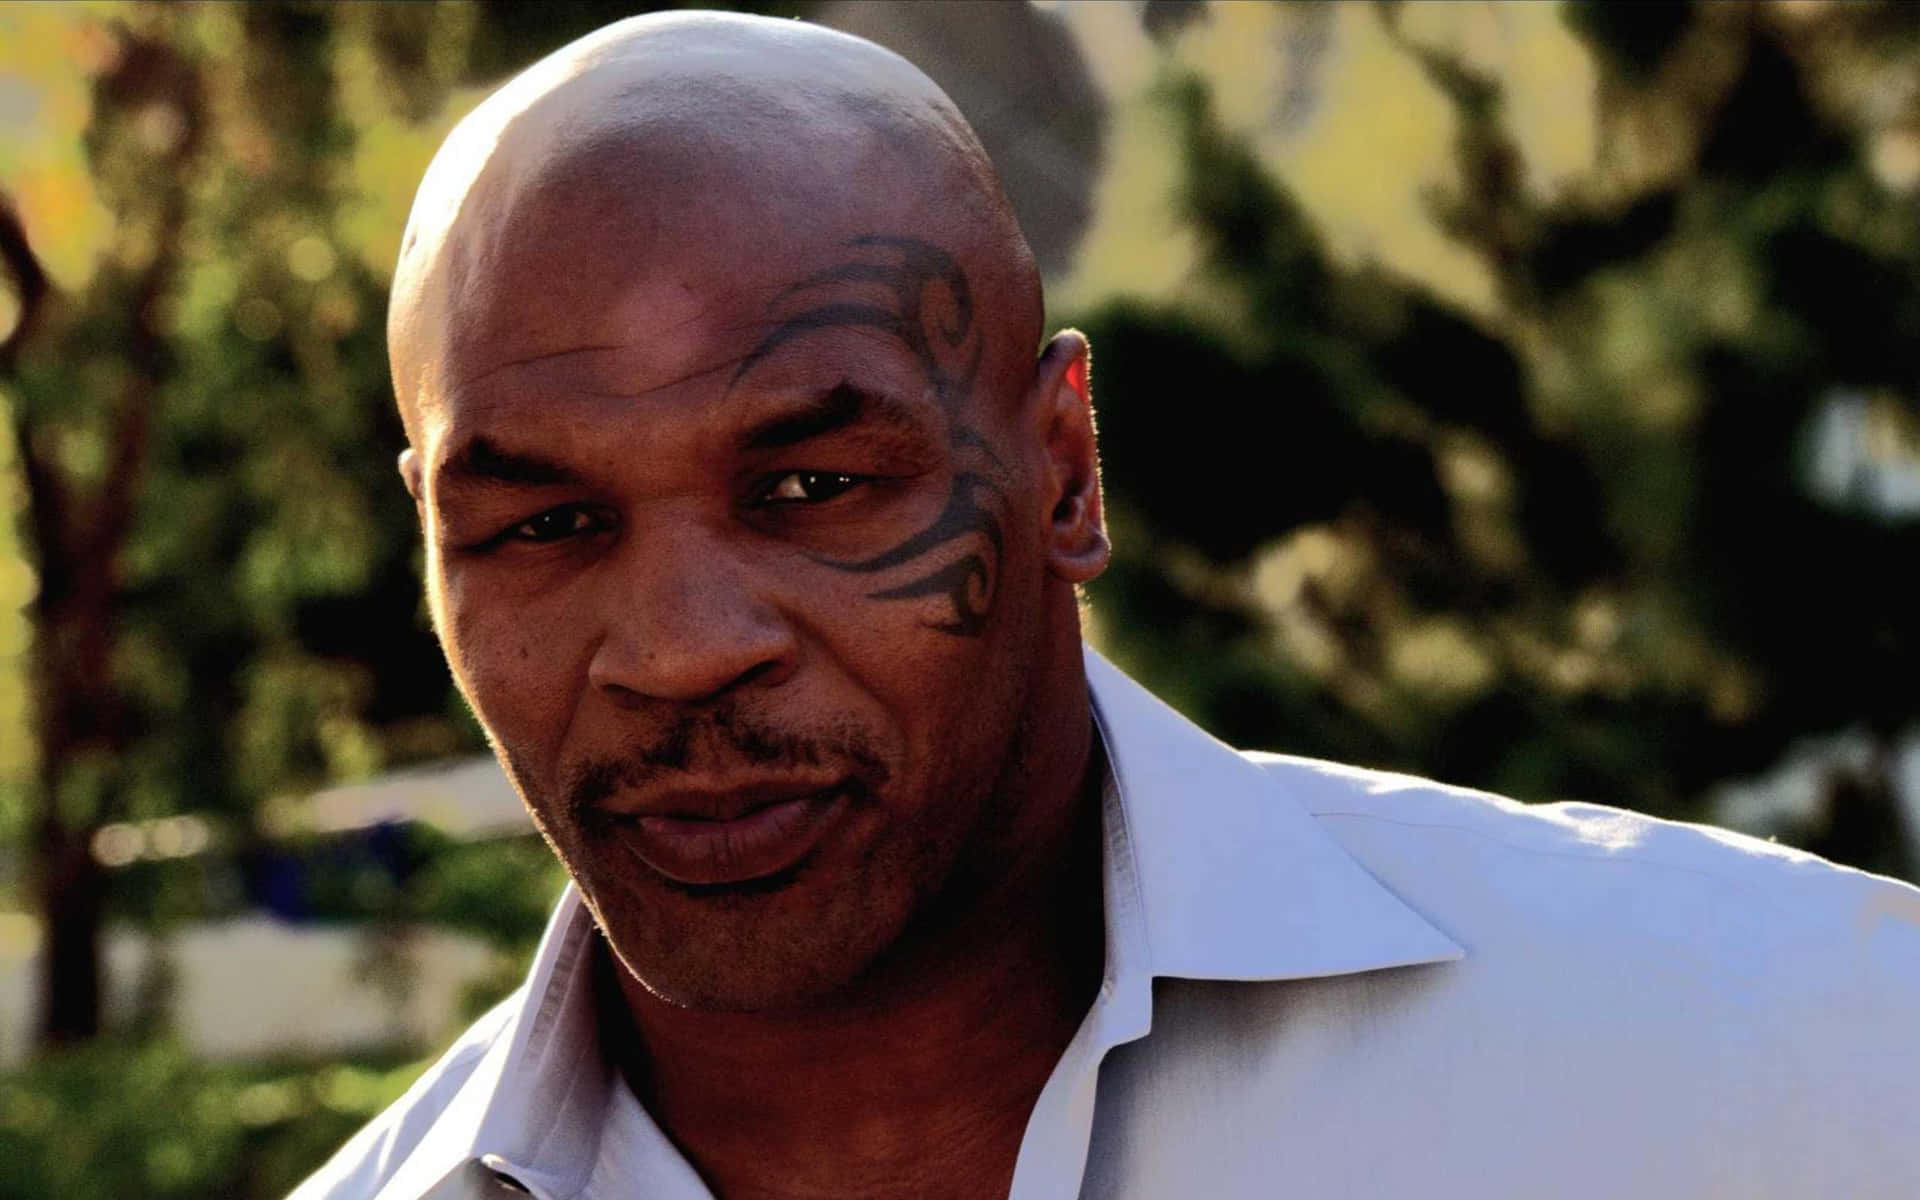 Former Heavyweight Champion, Mike Tyson in a boxing pose